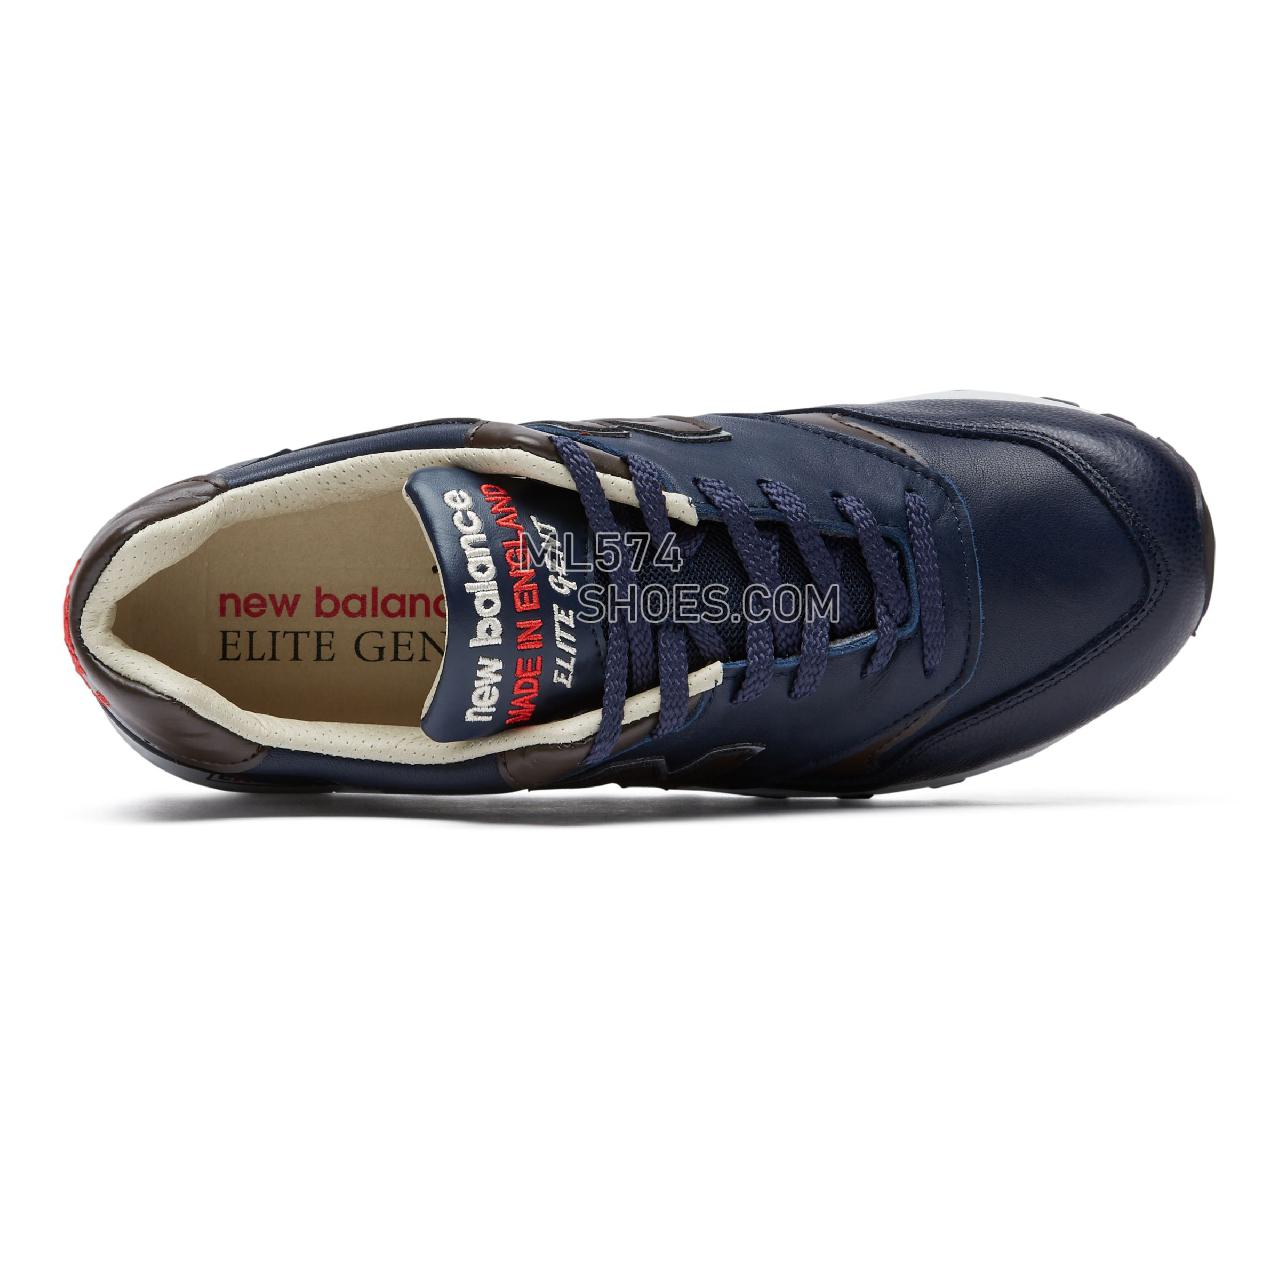 New Balance Made in UK 577 - Men's Made in UK 577 Classic ML577V1-27391-M - Navy with Brown and Red - M577GNB